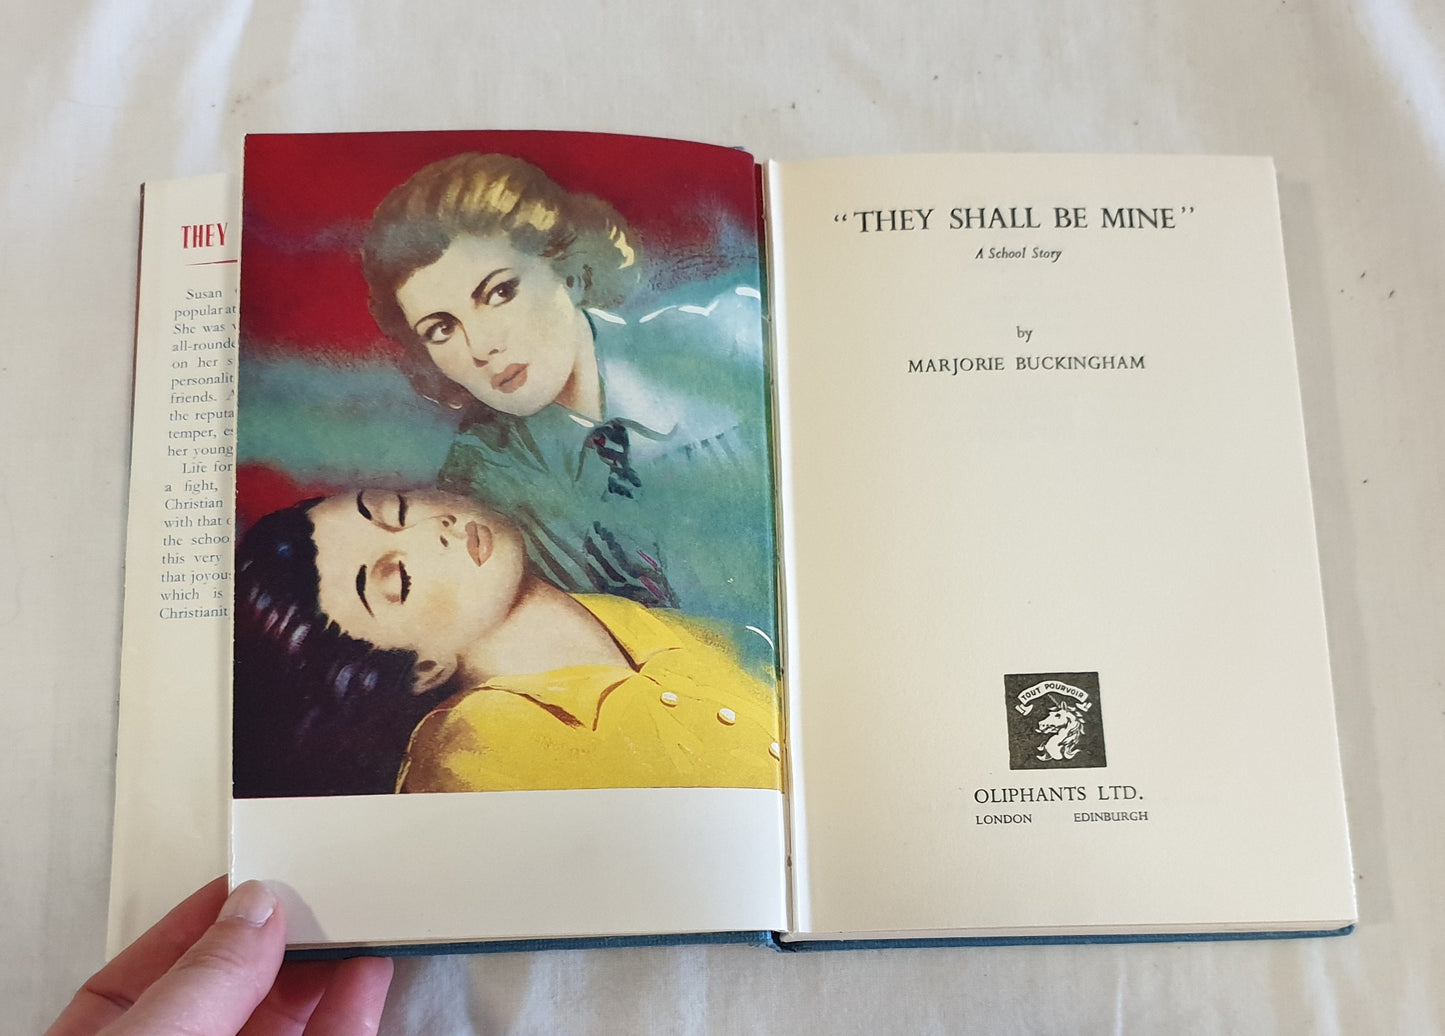 They Shall Be Mine by Marjorie Buckingham